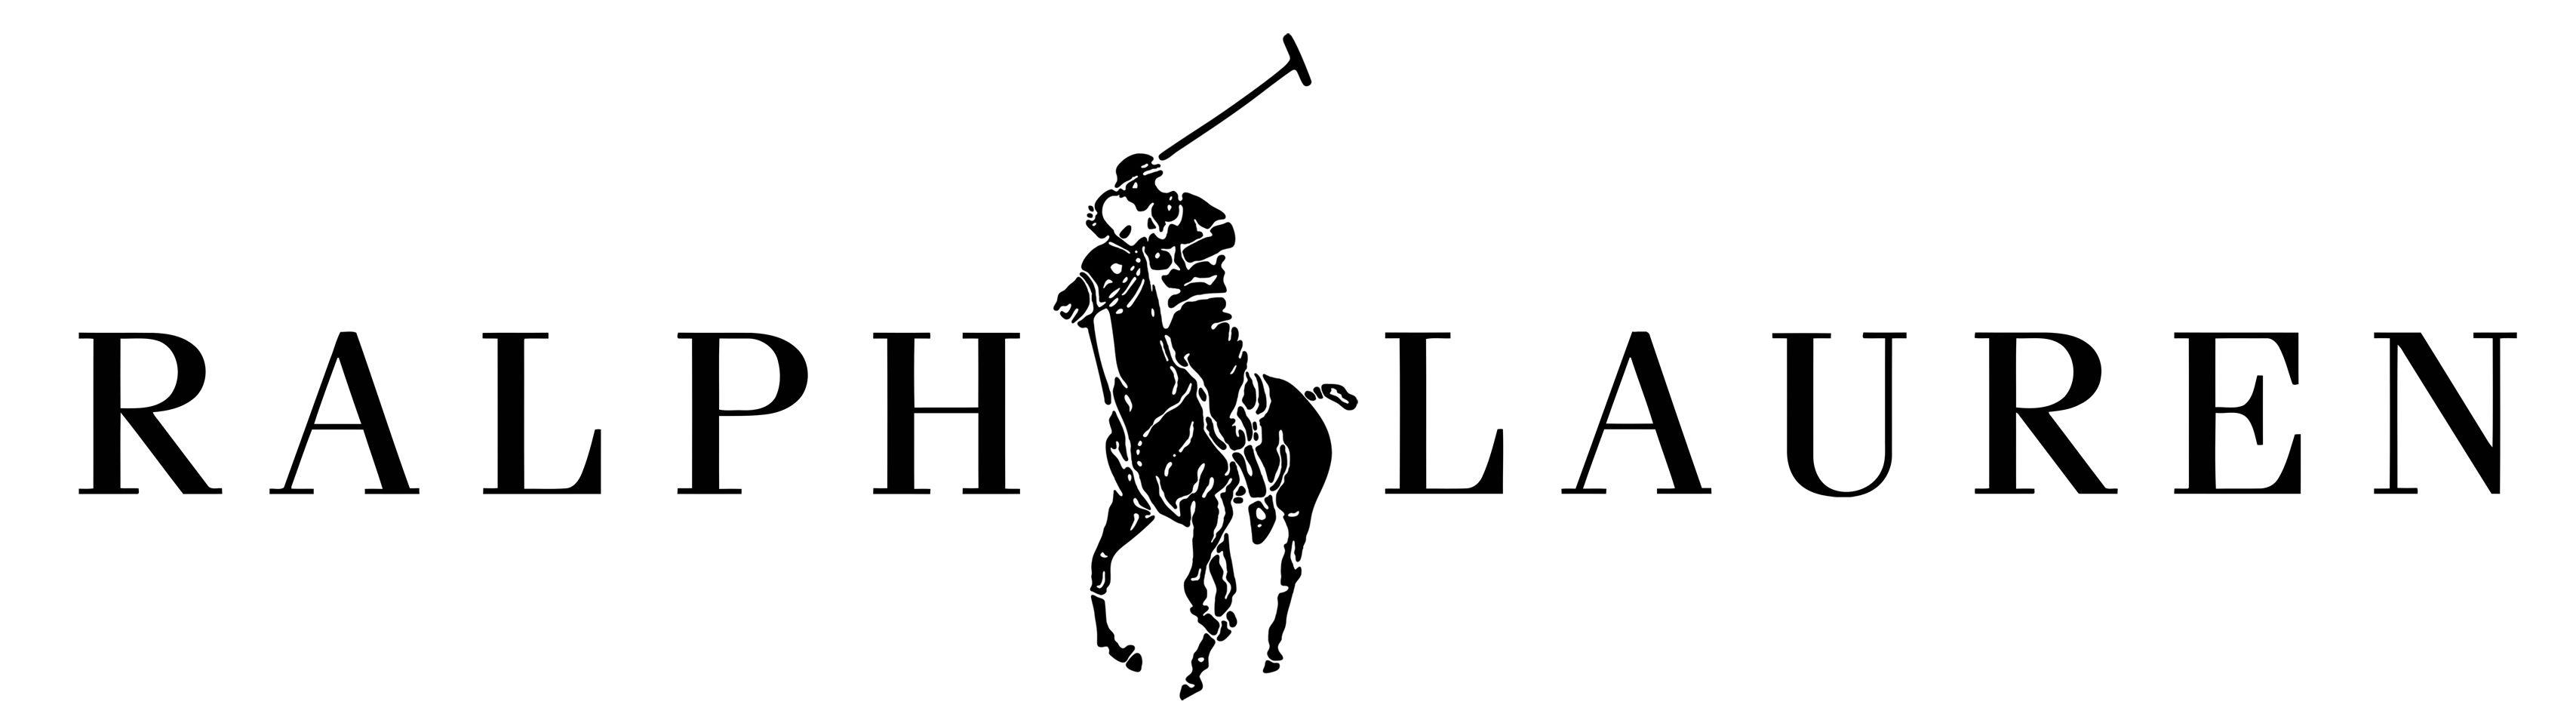 Ralph Lauren Logo - Ralph Lauren Logo, Ralph Lauren Symbol, Meaning, History and Evolution